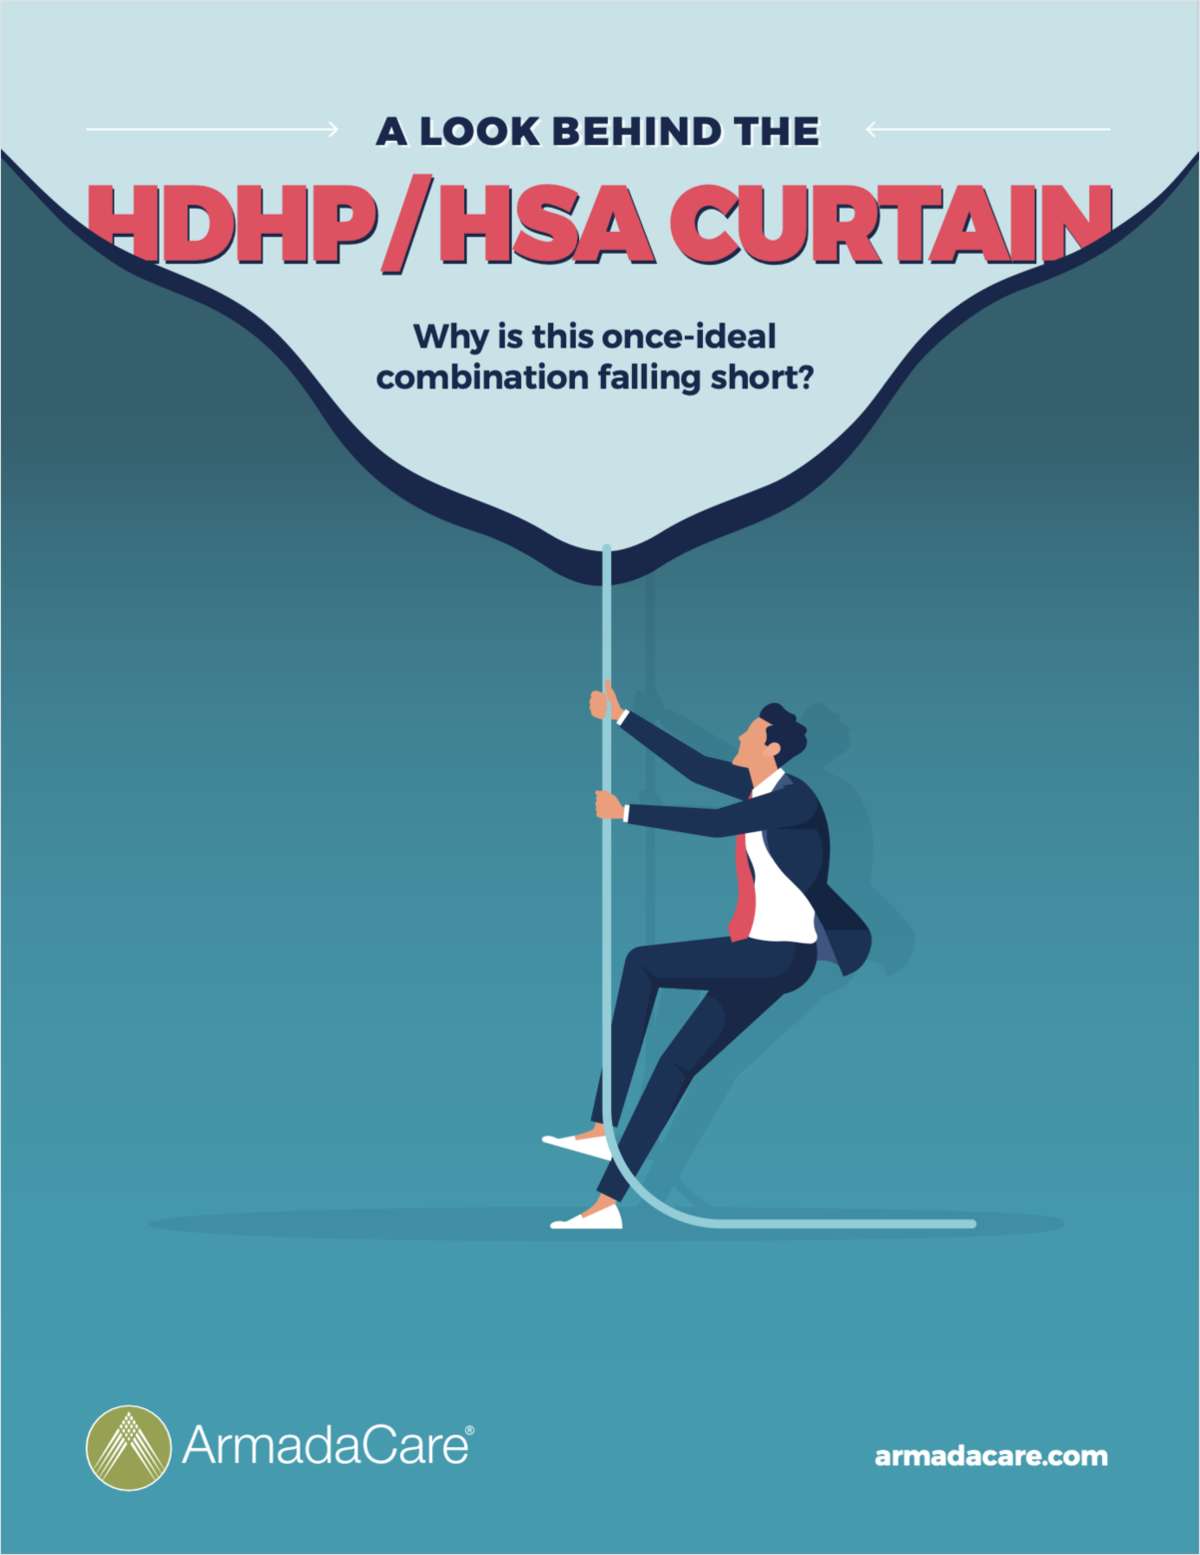 A Look Behind The HDHP/HSA Curtain